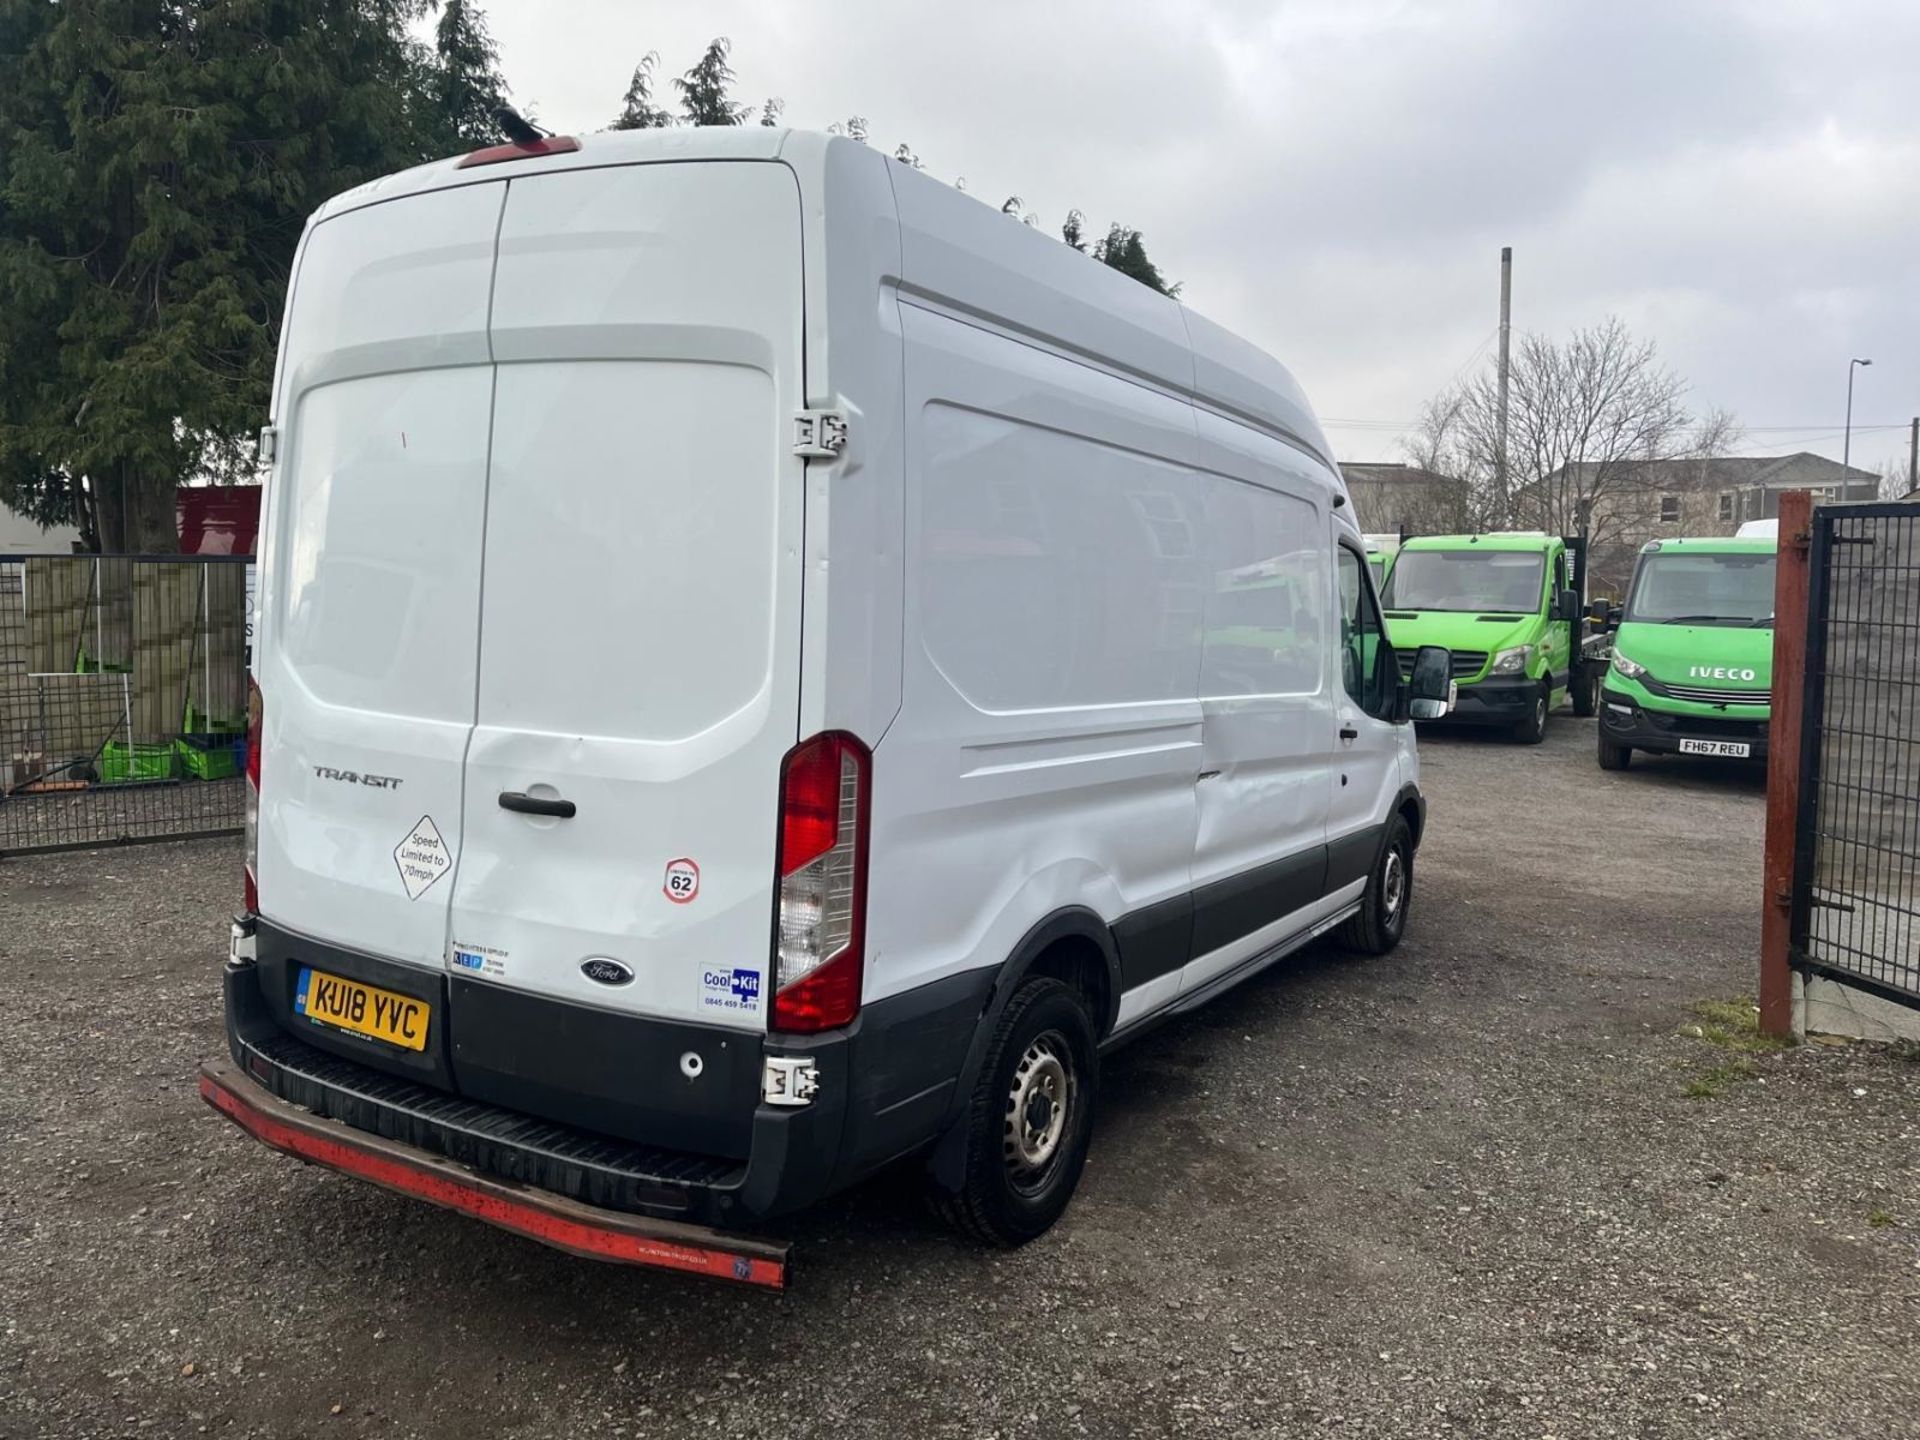 2018 FORD TRANSIT 2.0 TDCI 130PS L3 H3 - RELIABLE AND SPACIOUS LONG WHEELBASE PANEL VAN - Image 4 of 11